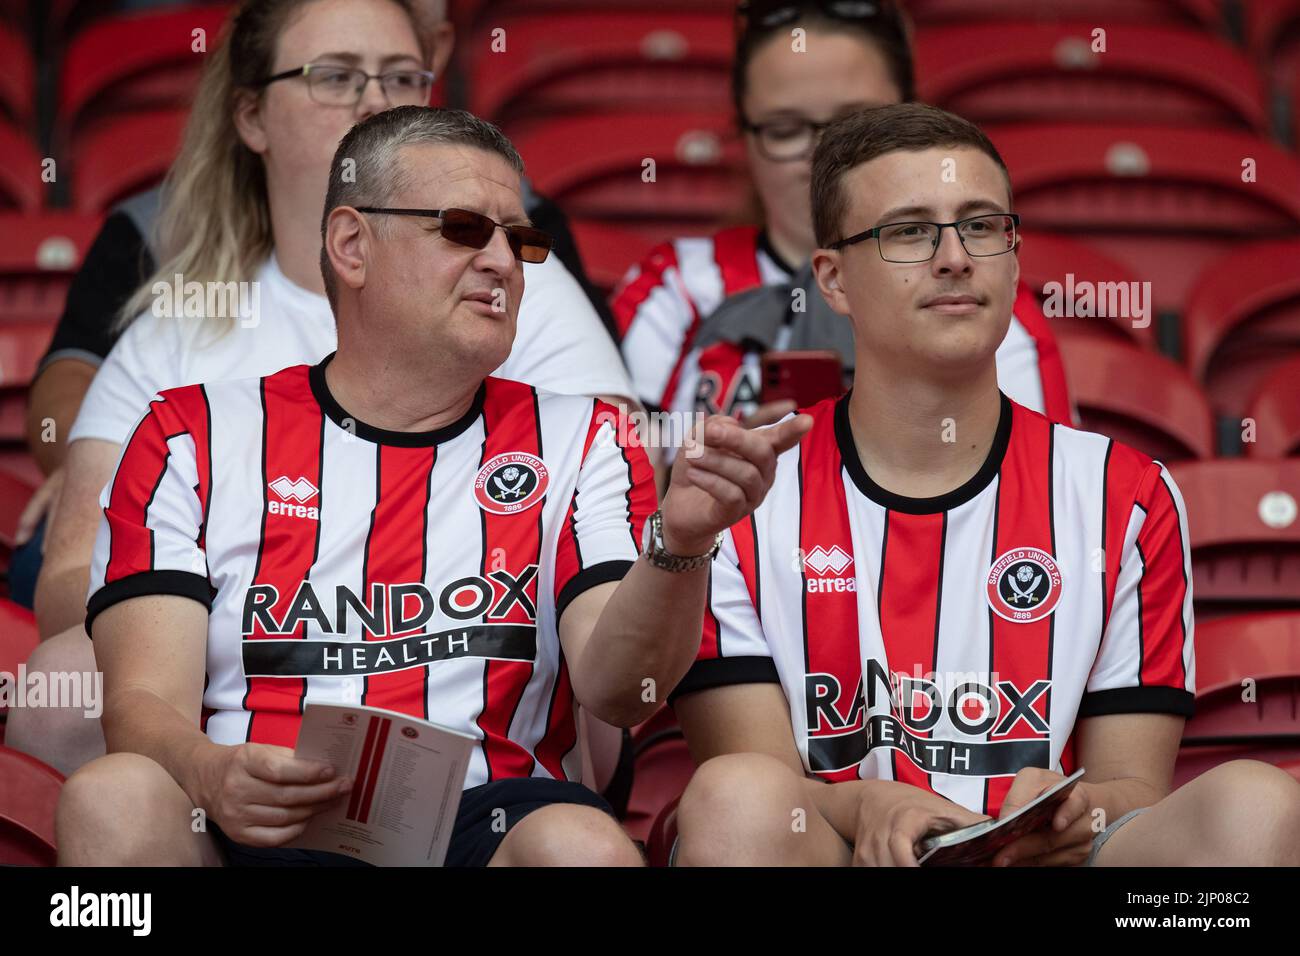 Sheffield United supporters ahead of the game Stock Photo